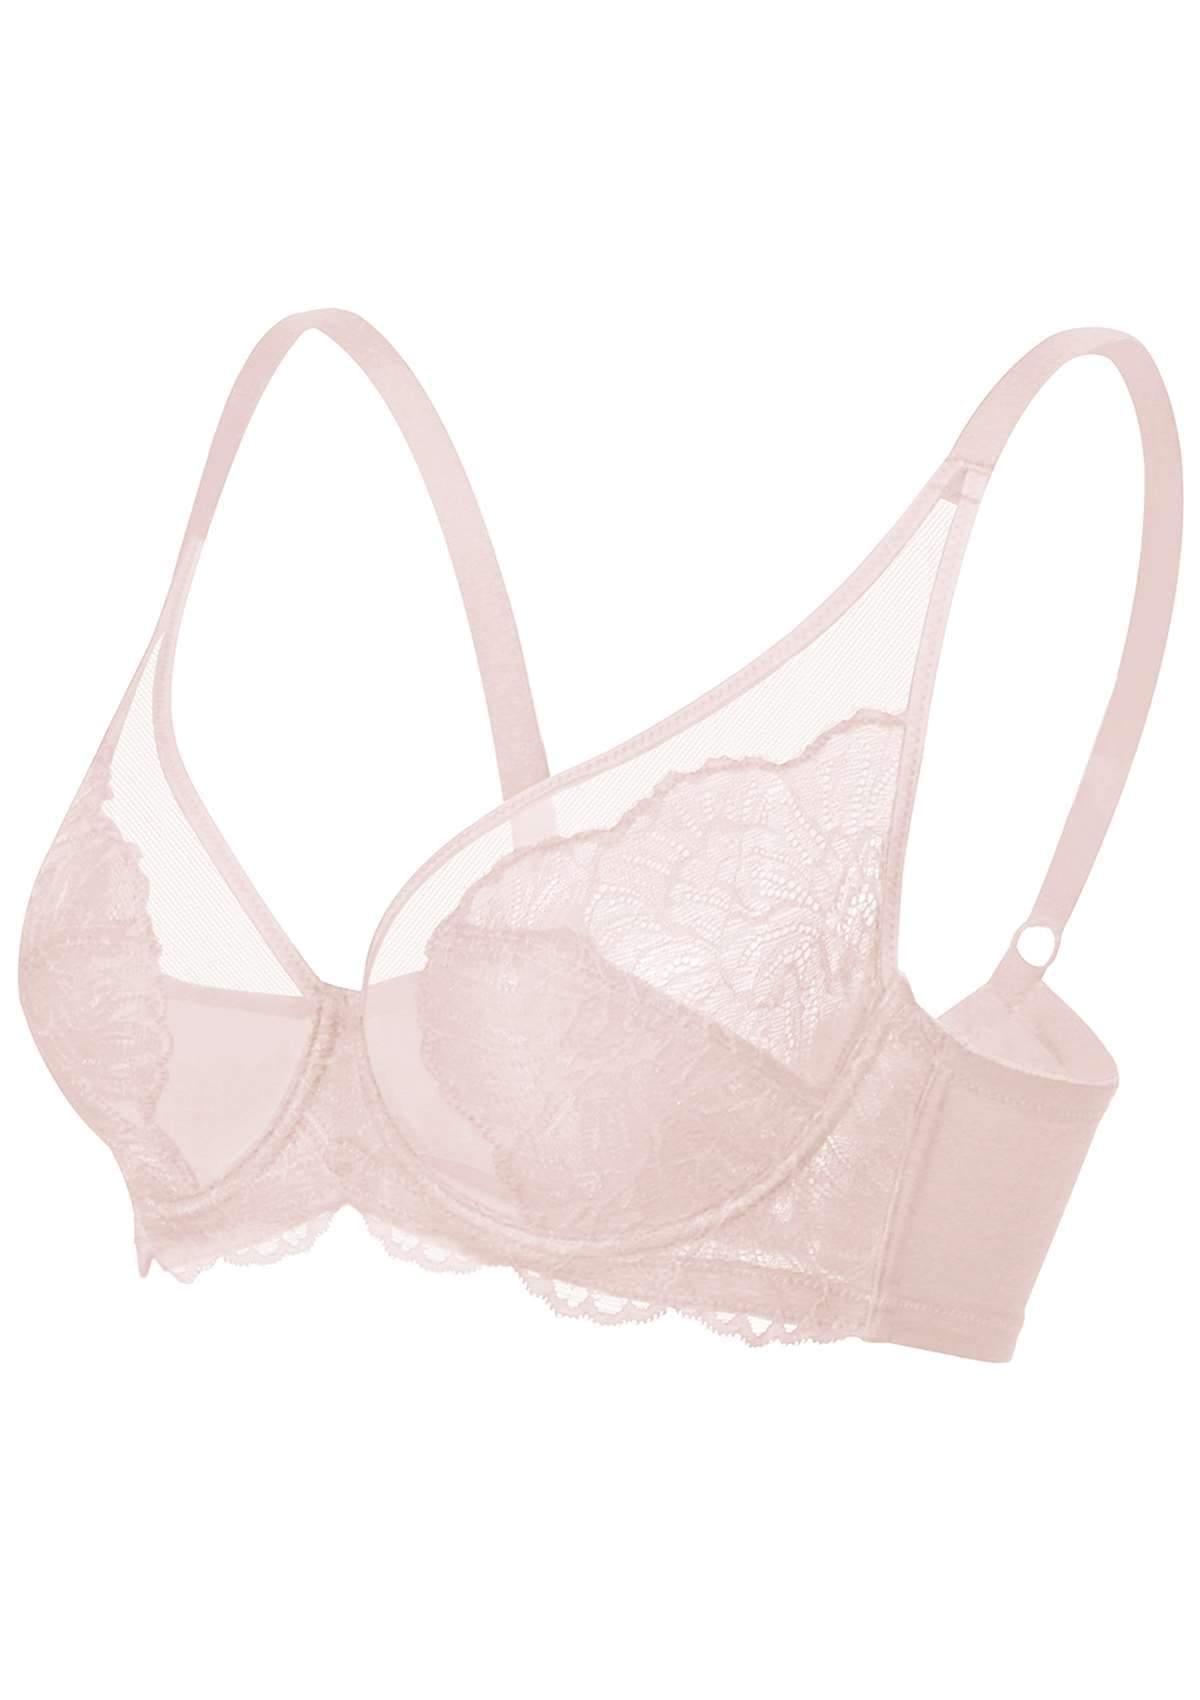 HSIA Blossom Lace Bra And Panties Set: Best Bra For Large Busts - Dark Pink / 40 / G